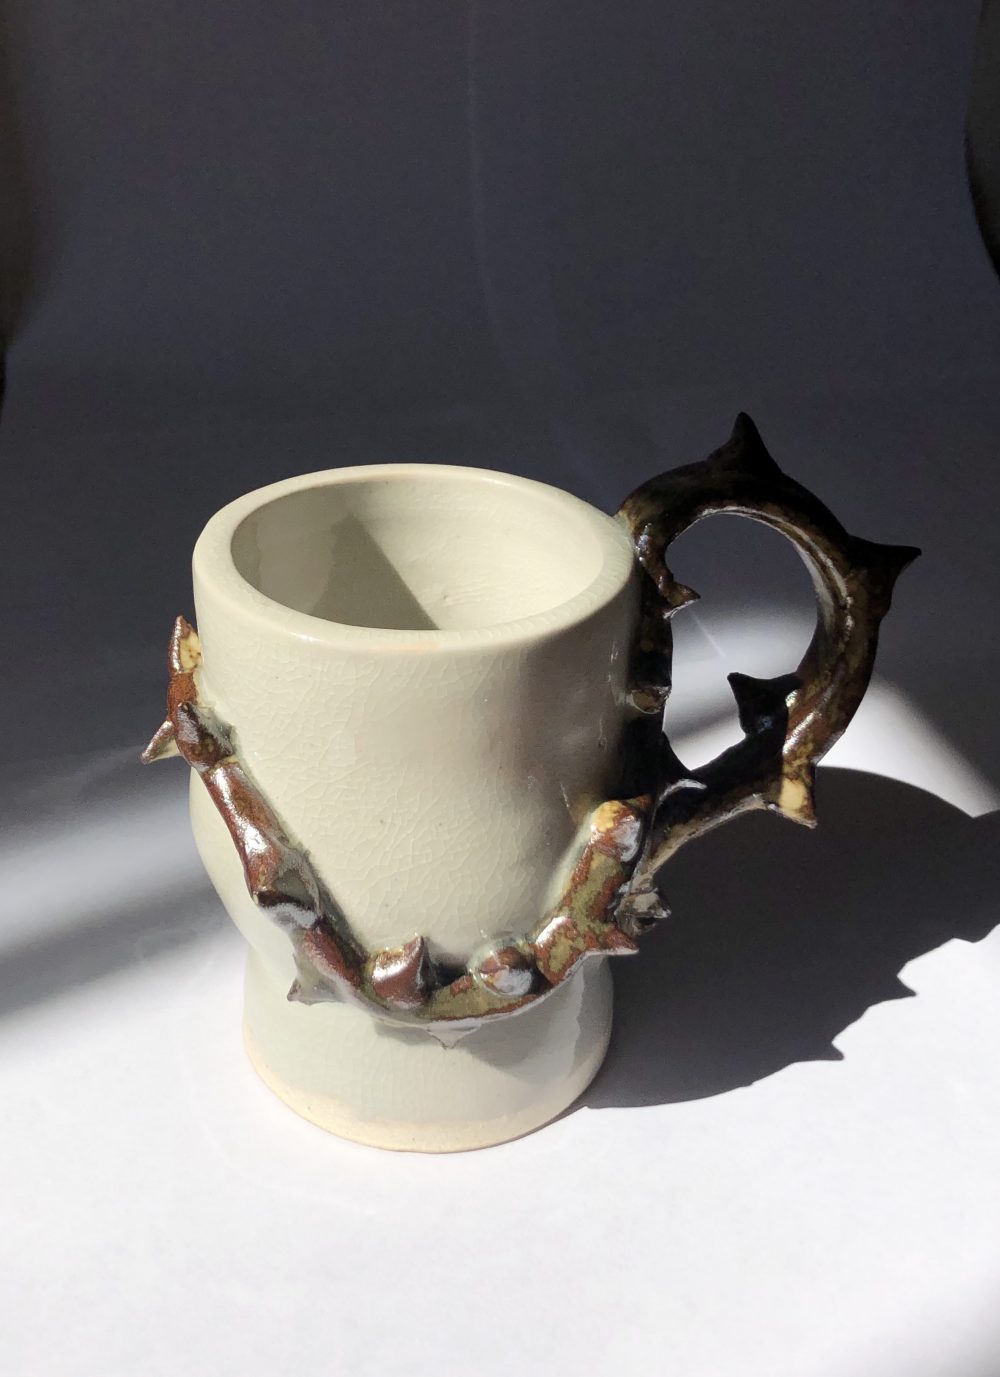 Ruby Nelson, Cup with Thorns, 2020, wheel throwing, hand building, clay, glaze, 4" x 5" x 3"